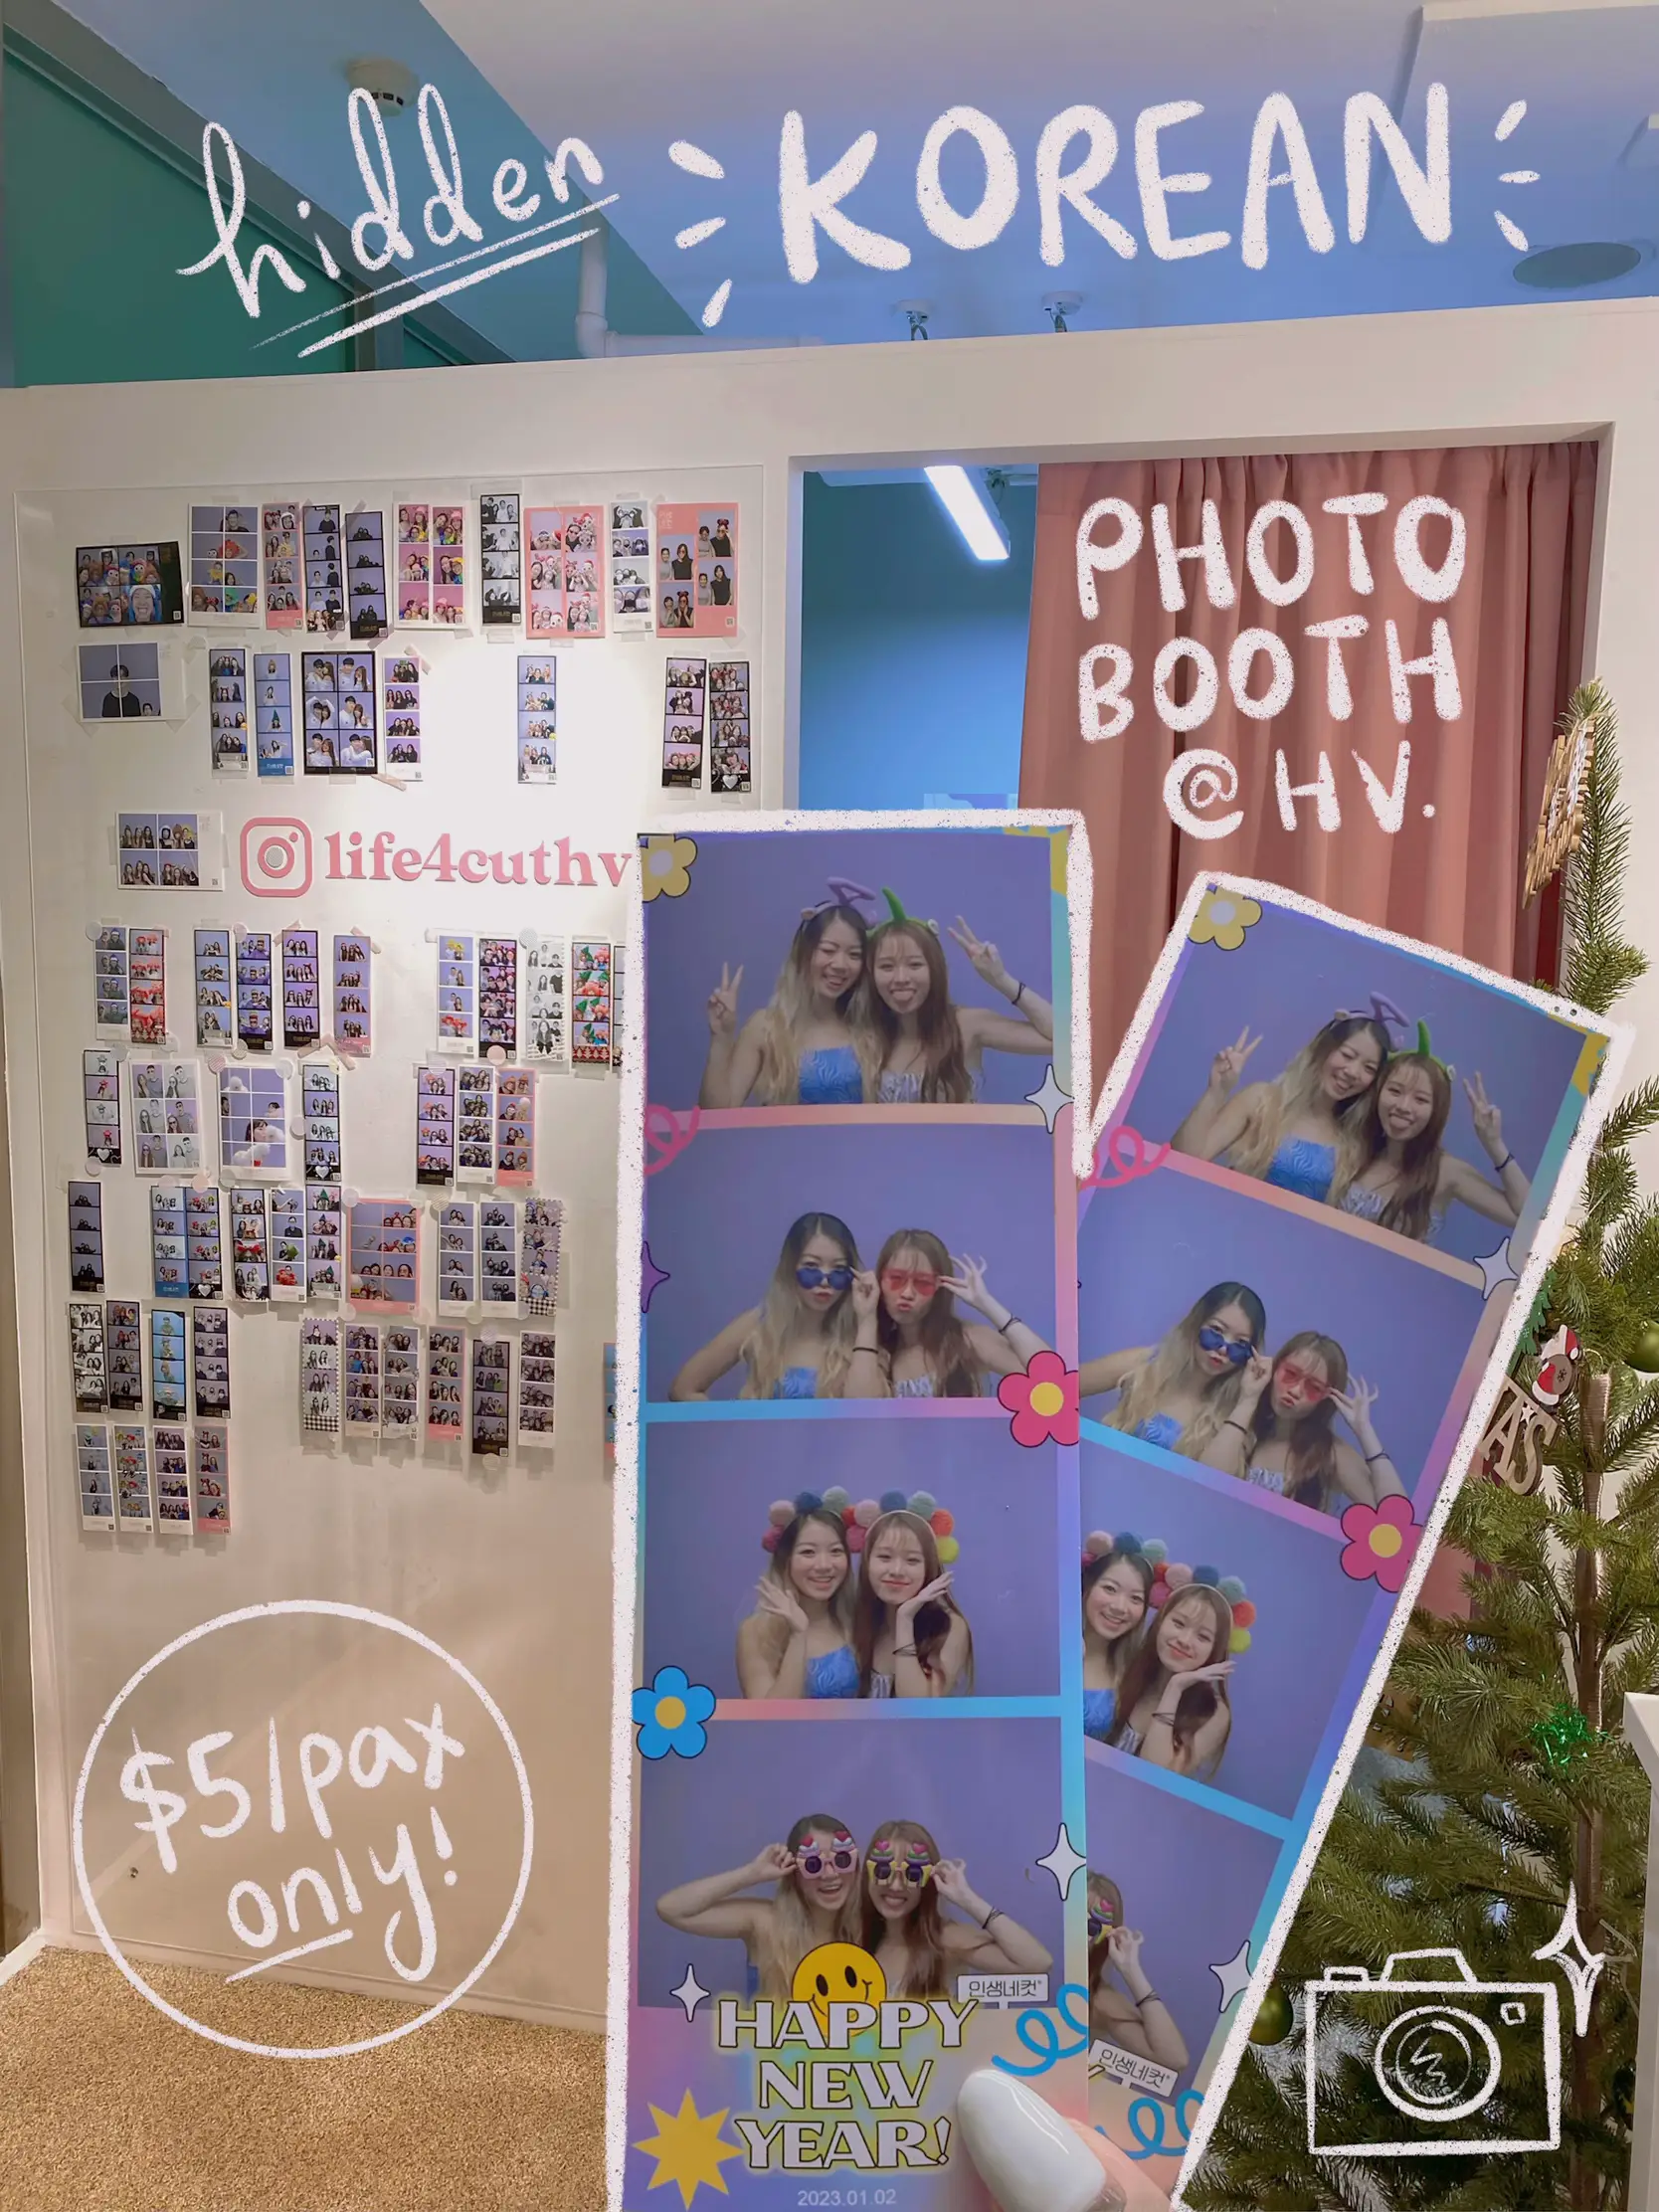 Did you know there's a Korean-style photobooth machine at